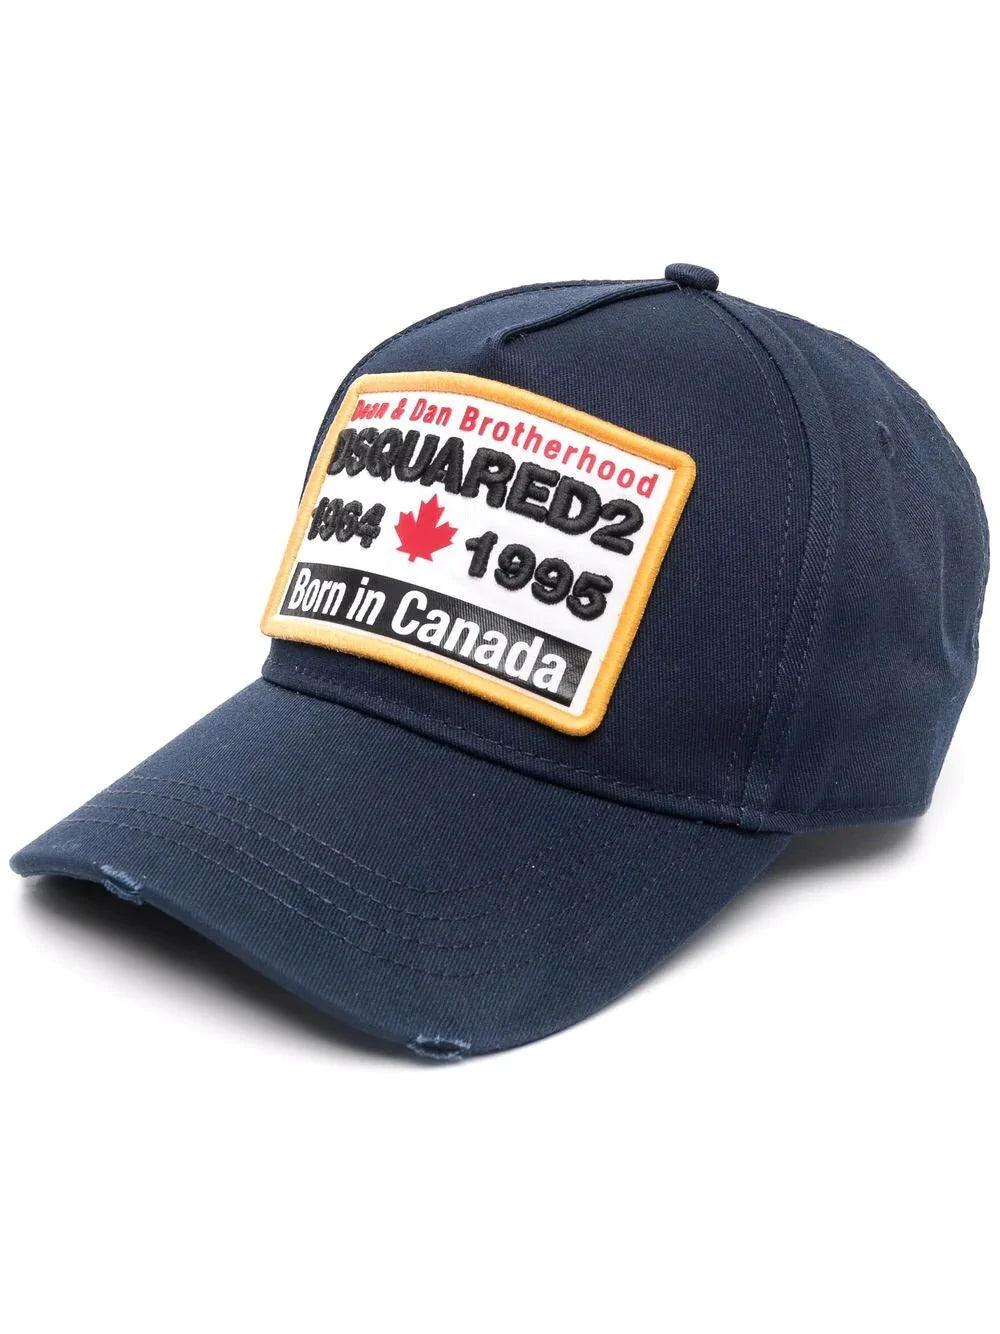 DSquared² Born In Canada Badge Navy Blue Baseball Cap for Men | Lyst